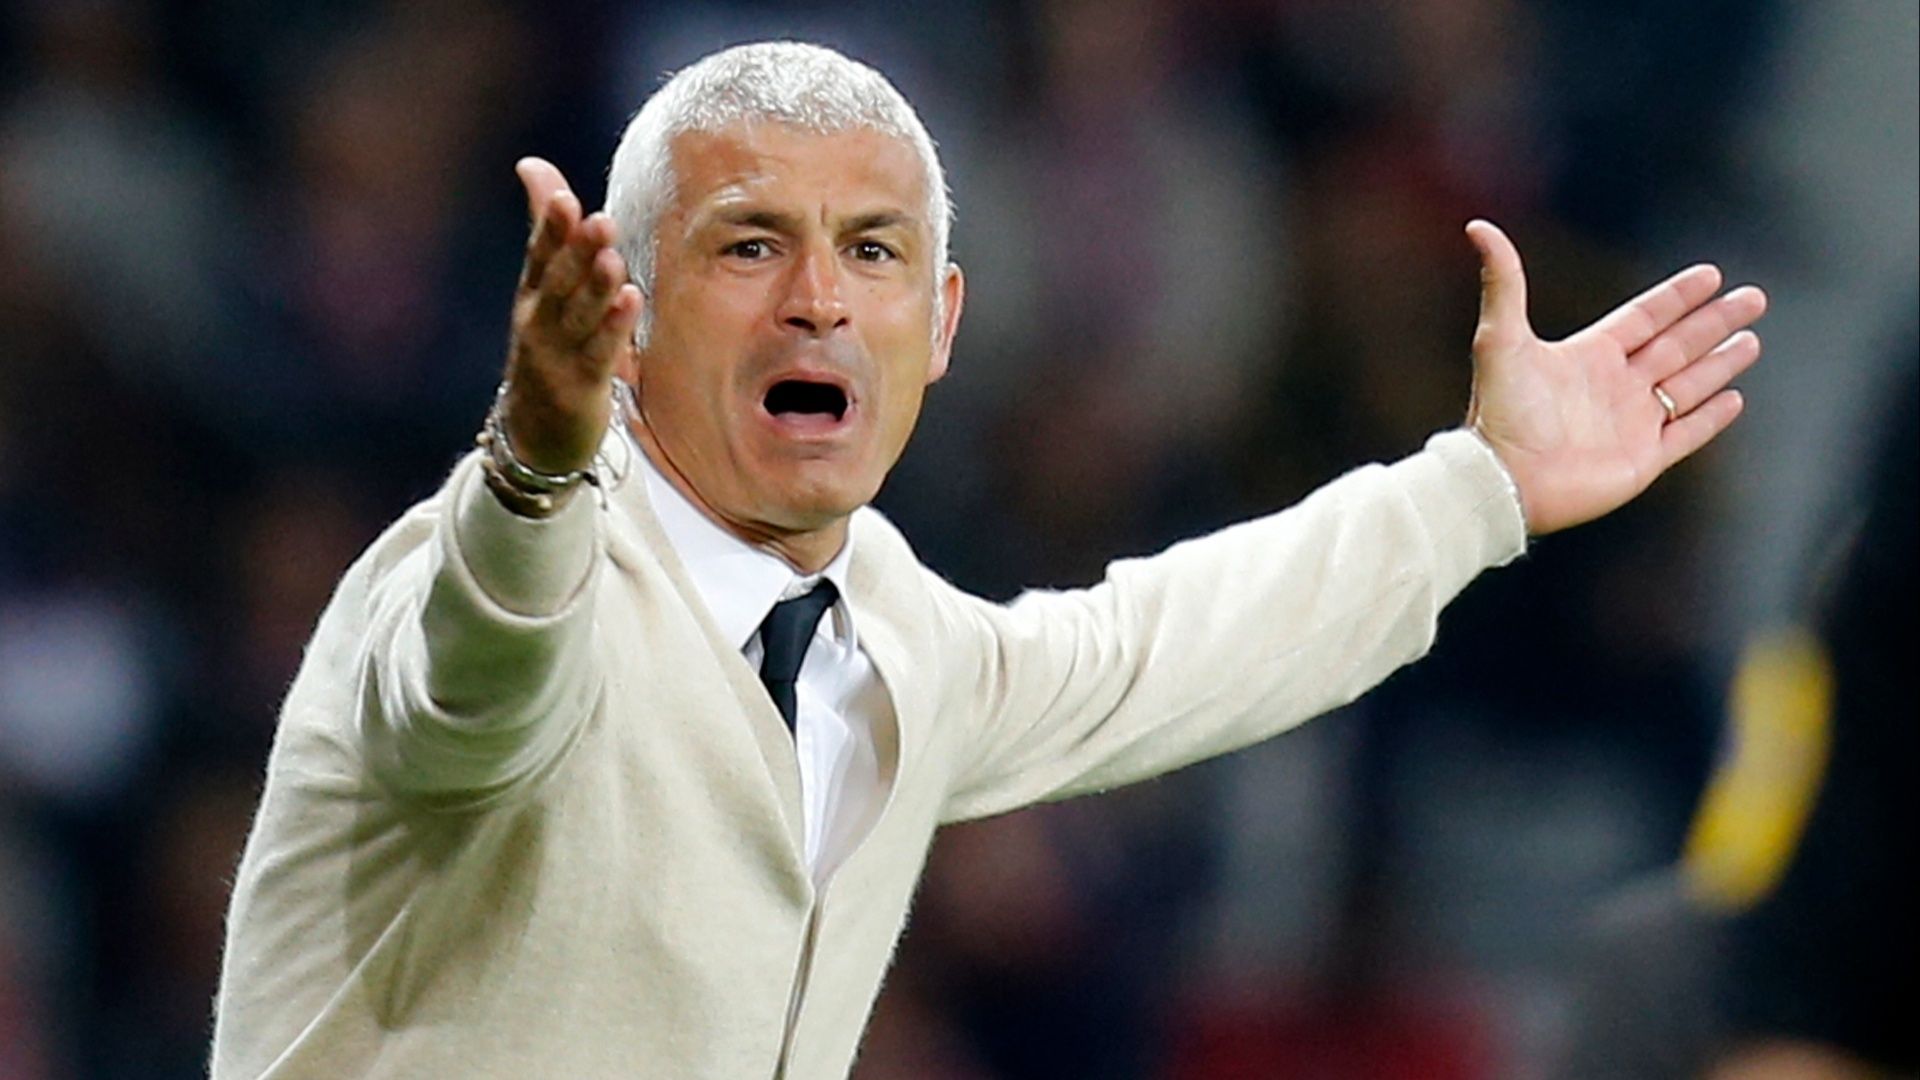 Fabrizio Ravanelli appointed manager of Arsenal Kiev